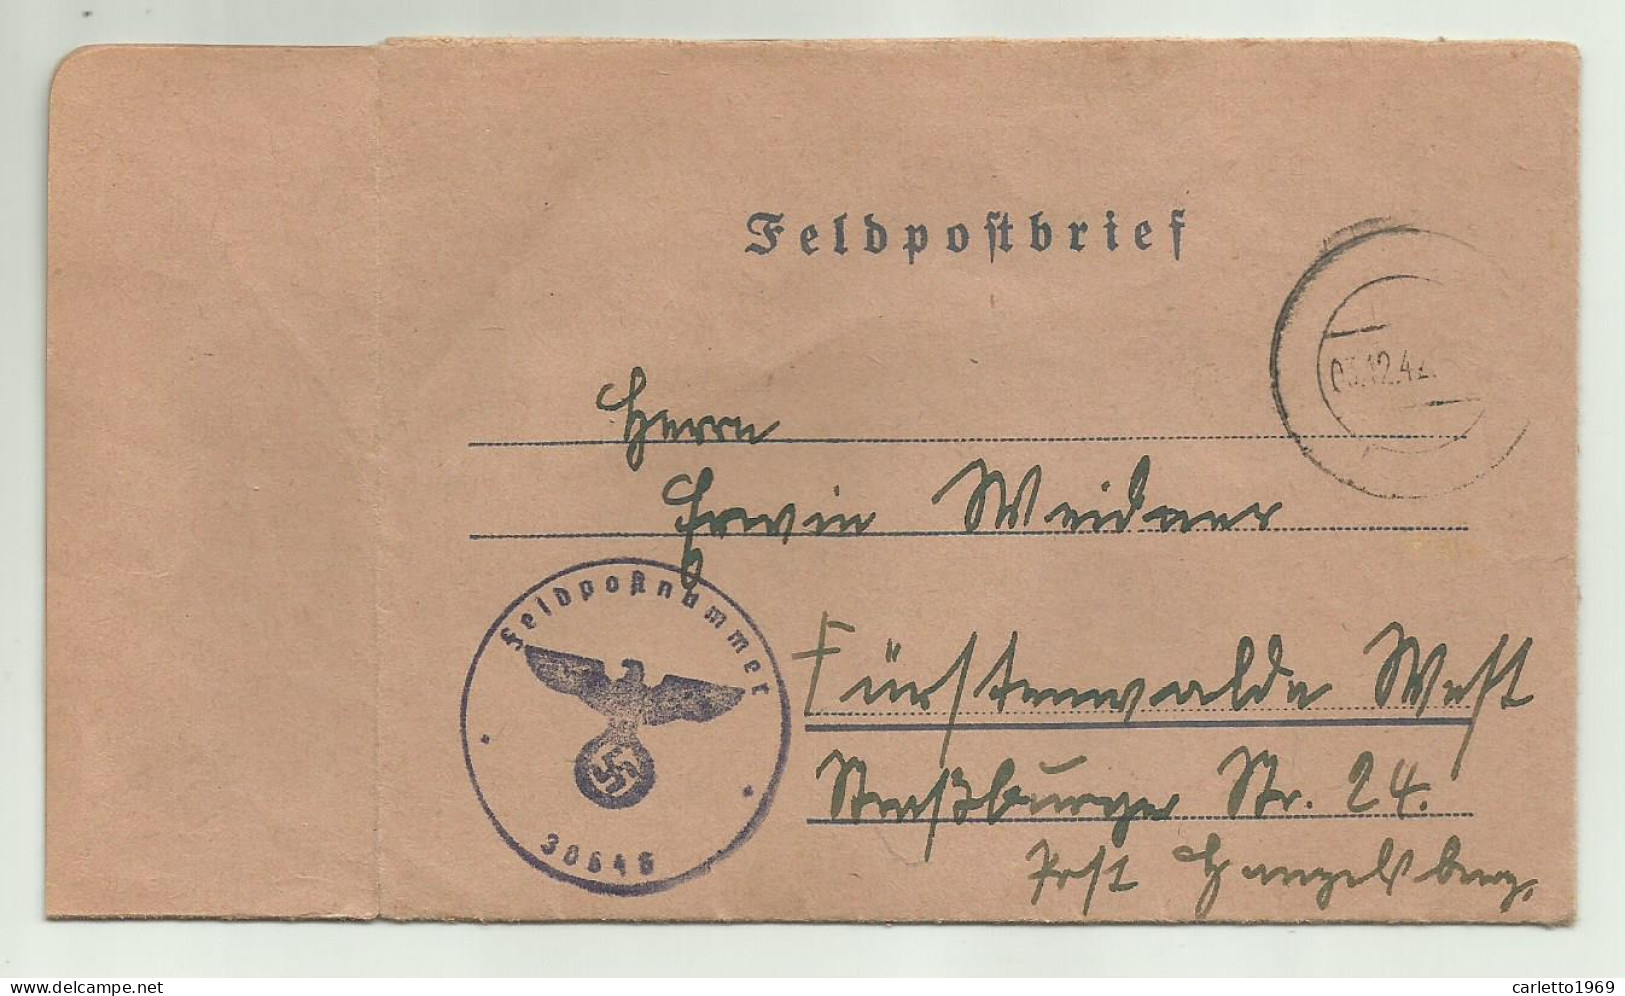 FELDPOSTBRIEF  1942   CON LETTERA  - Used Stamps